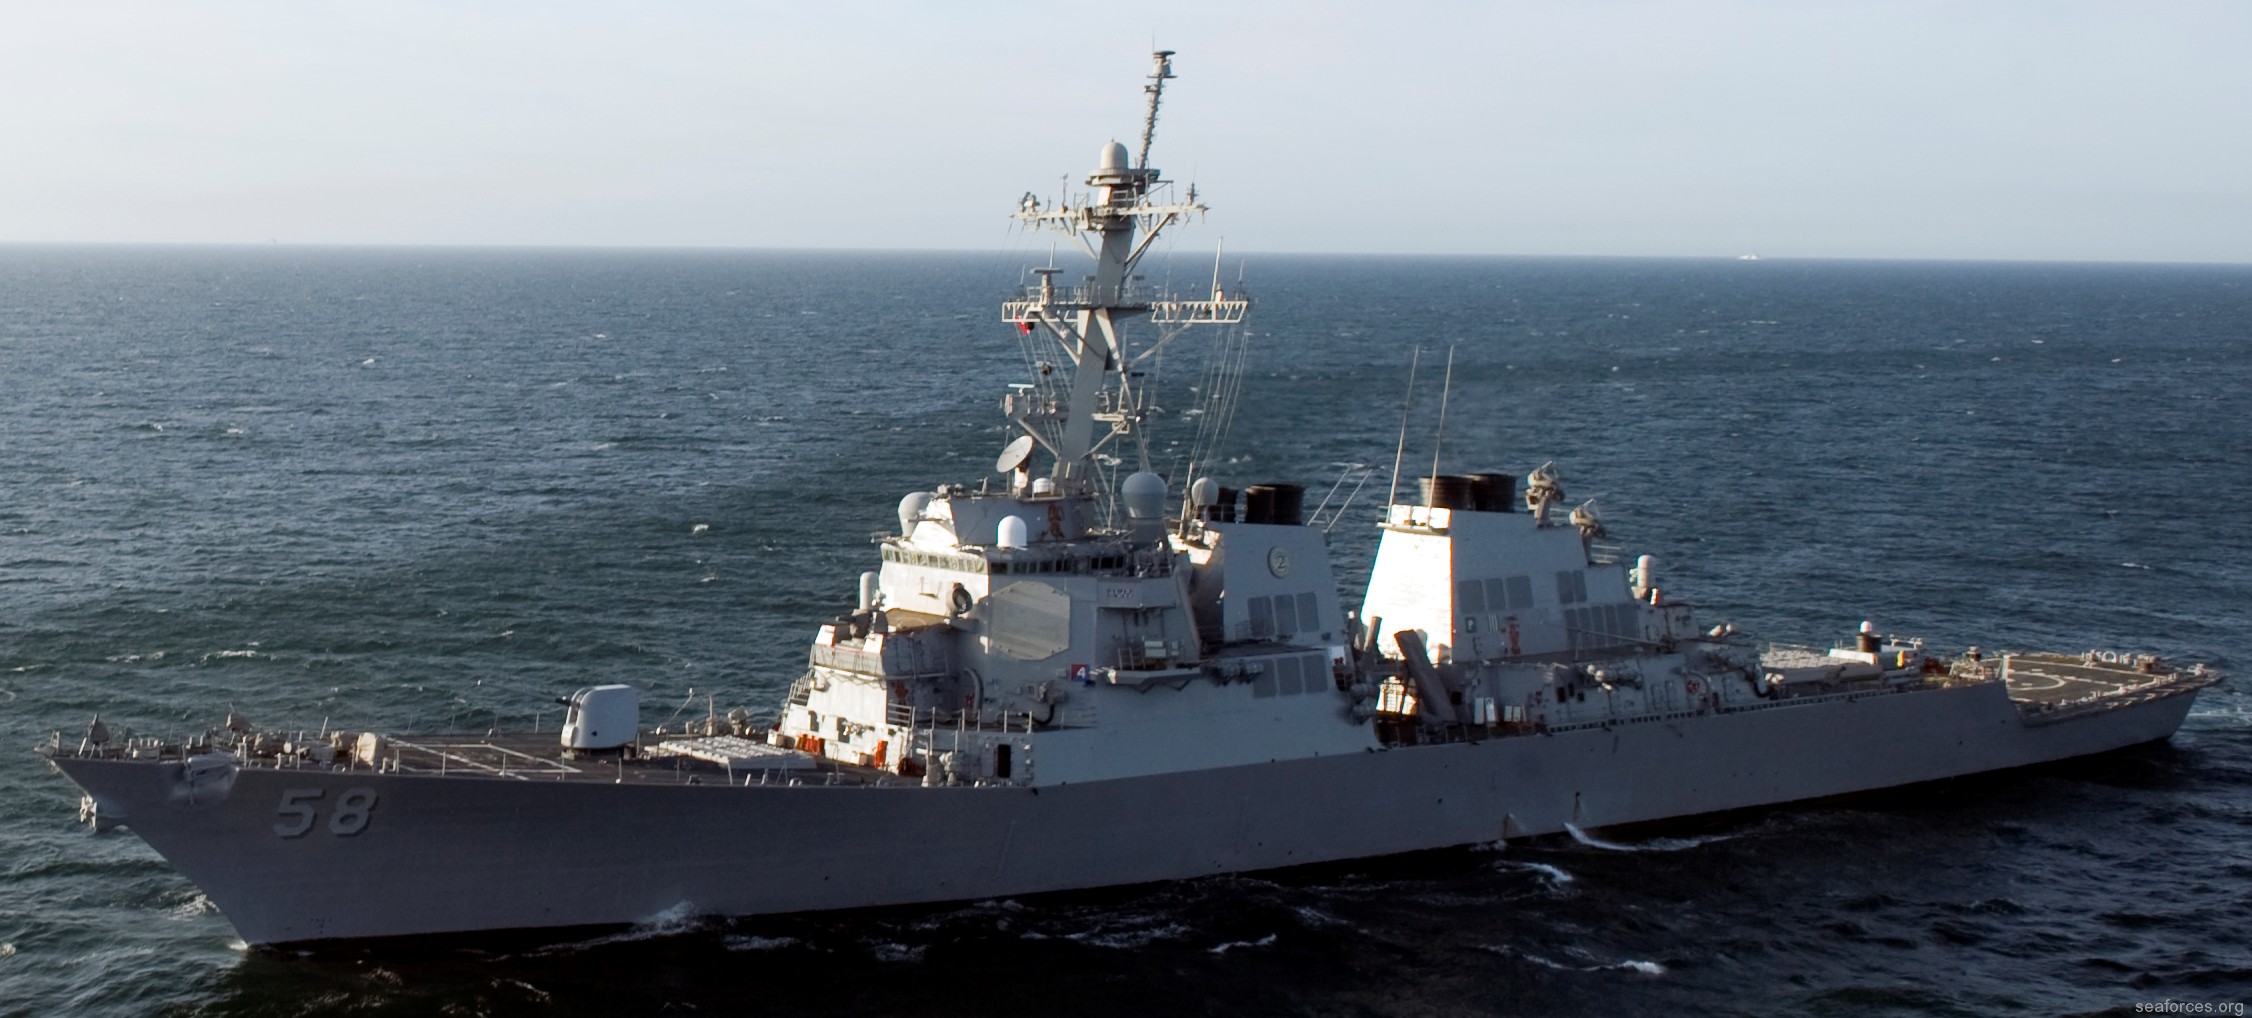 ddg-58 uss laboon guided missile destroyer us navy 53